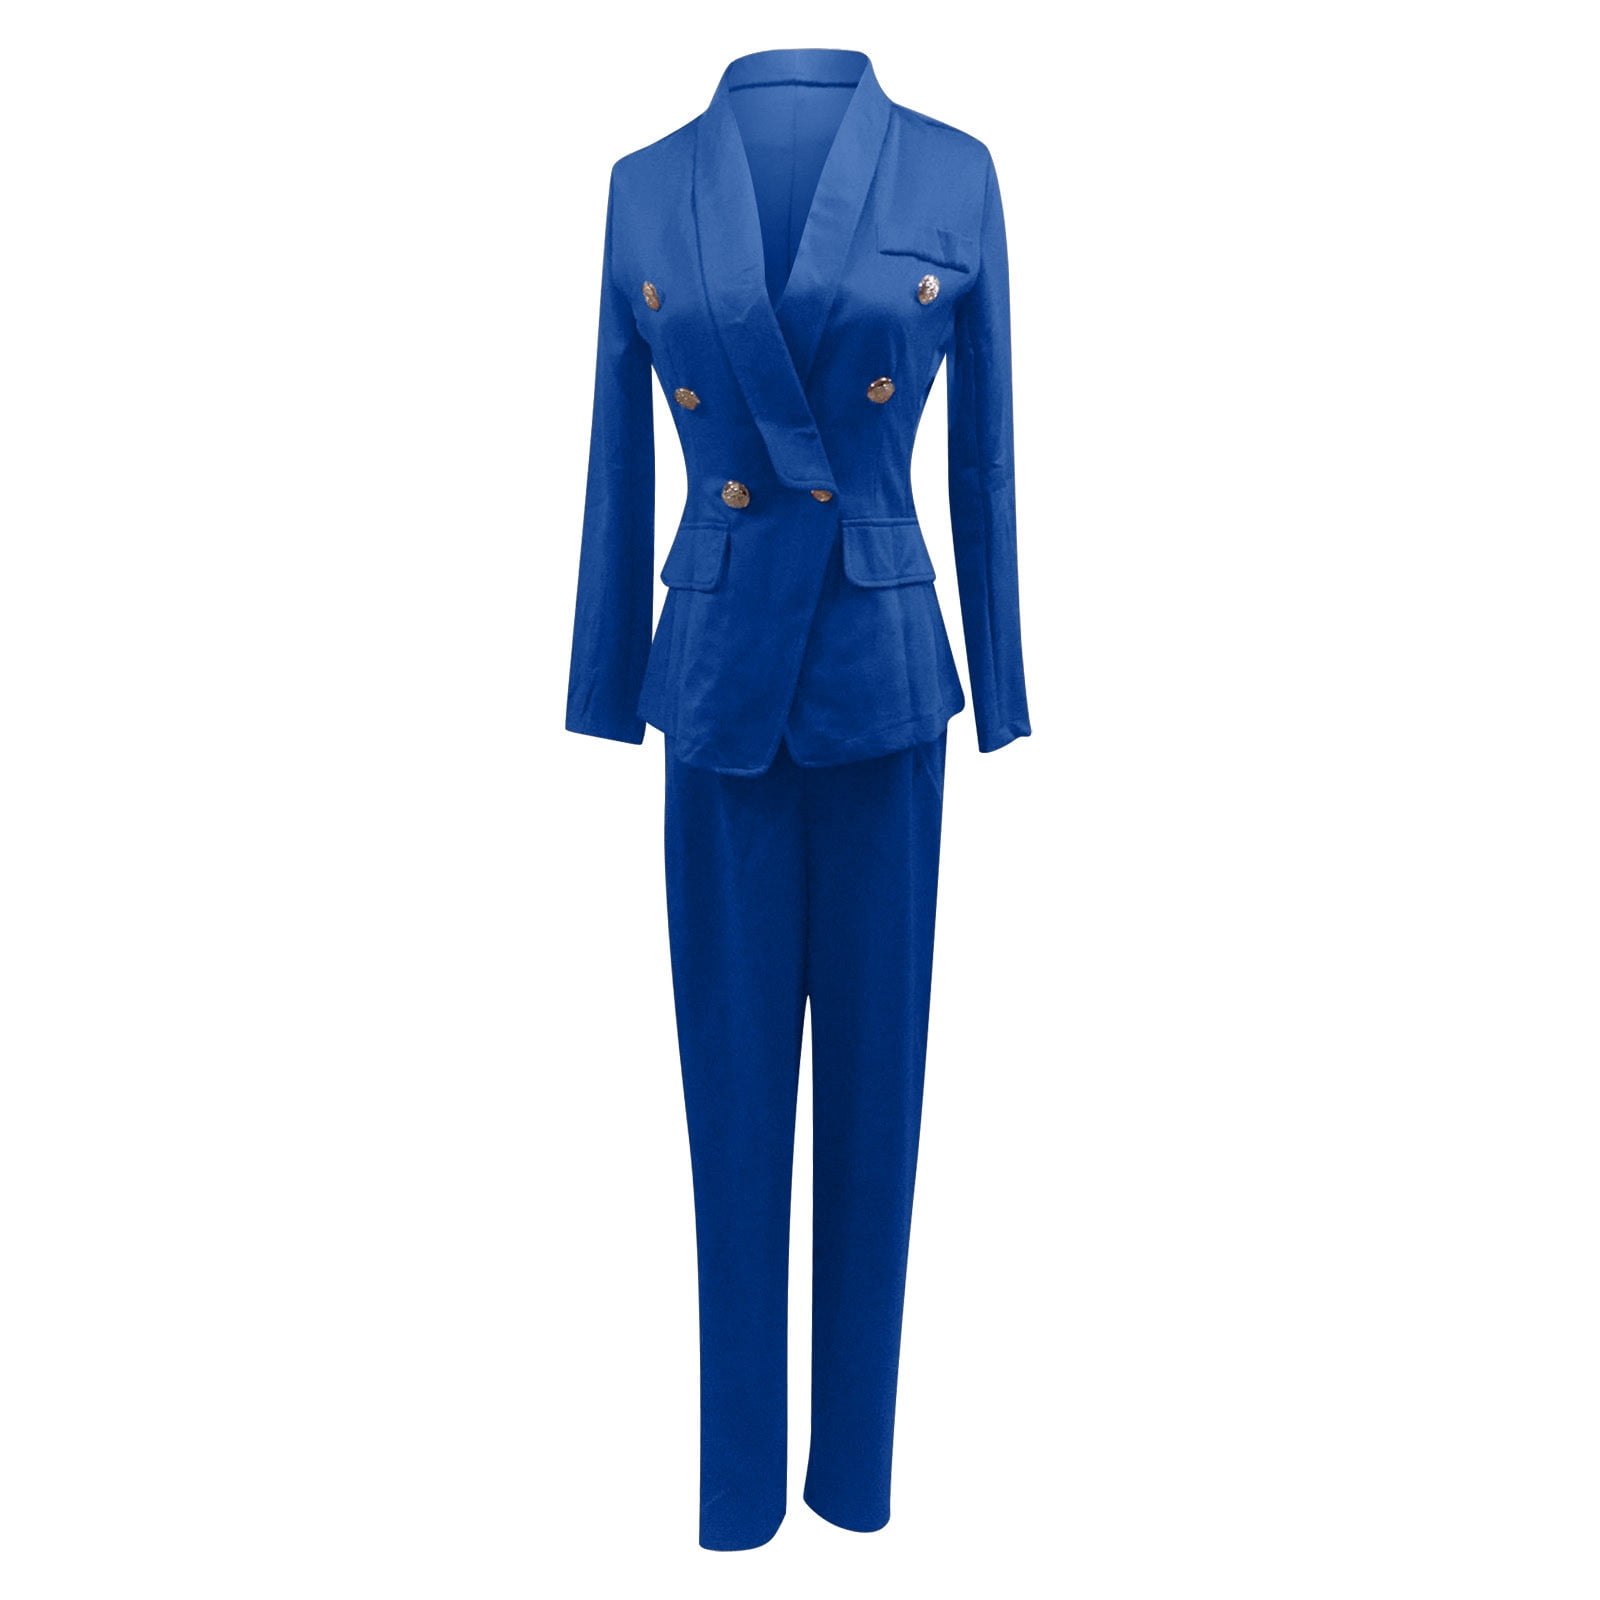 JGGSPWM Women 2 Piece Outfits Suits Set Long Sleeve Button Blazer High  Waisted Pants Jumpsuit for Business Work Elegant Fall Spring 2 Pieces Set  Dark Blue XL 